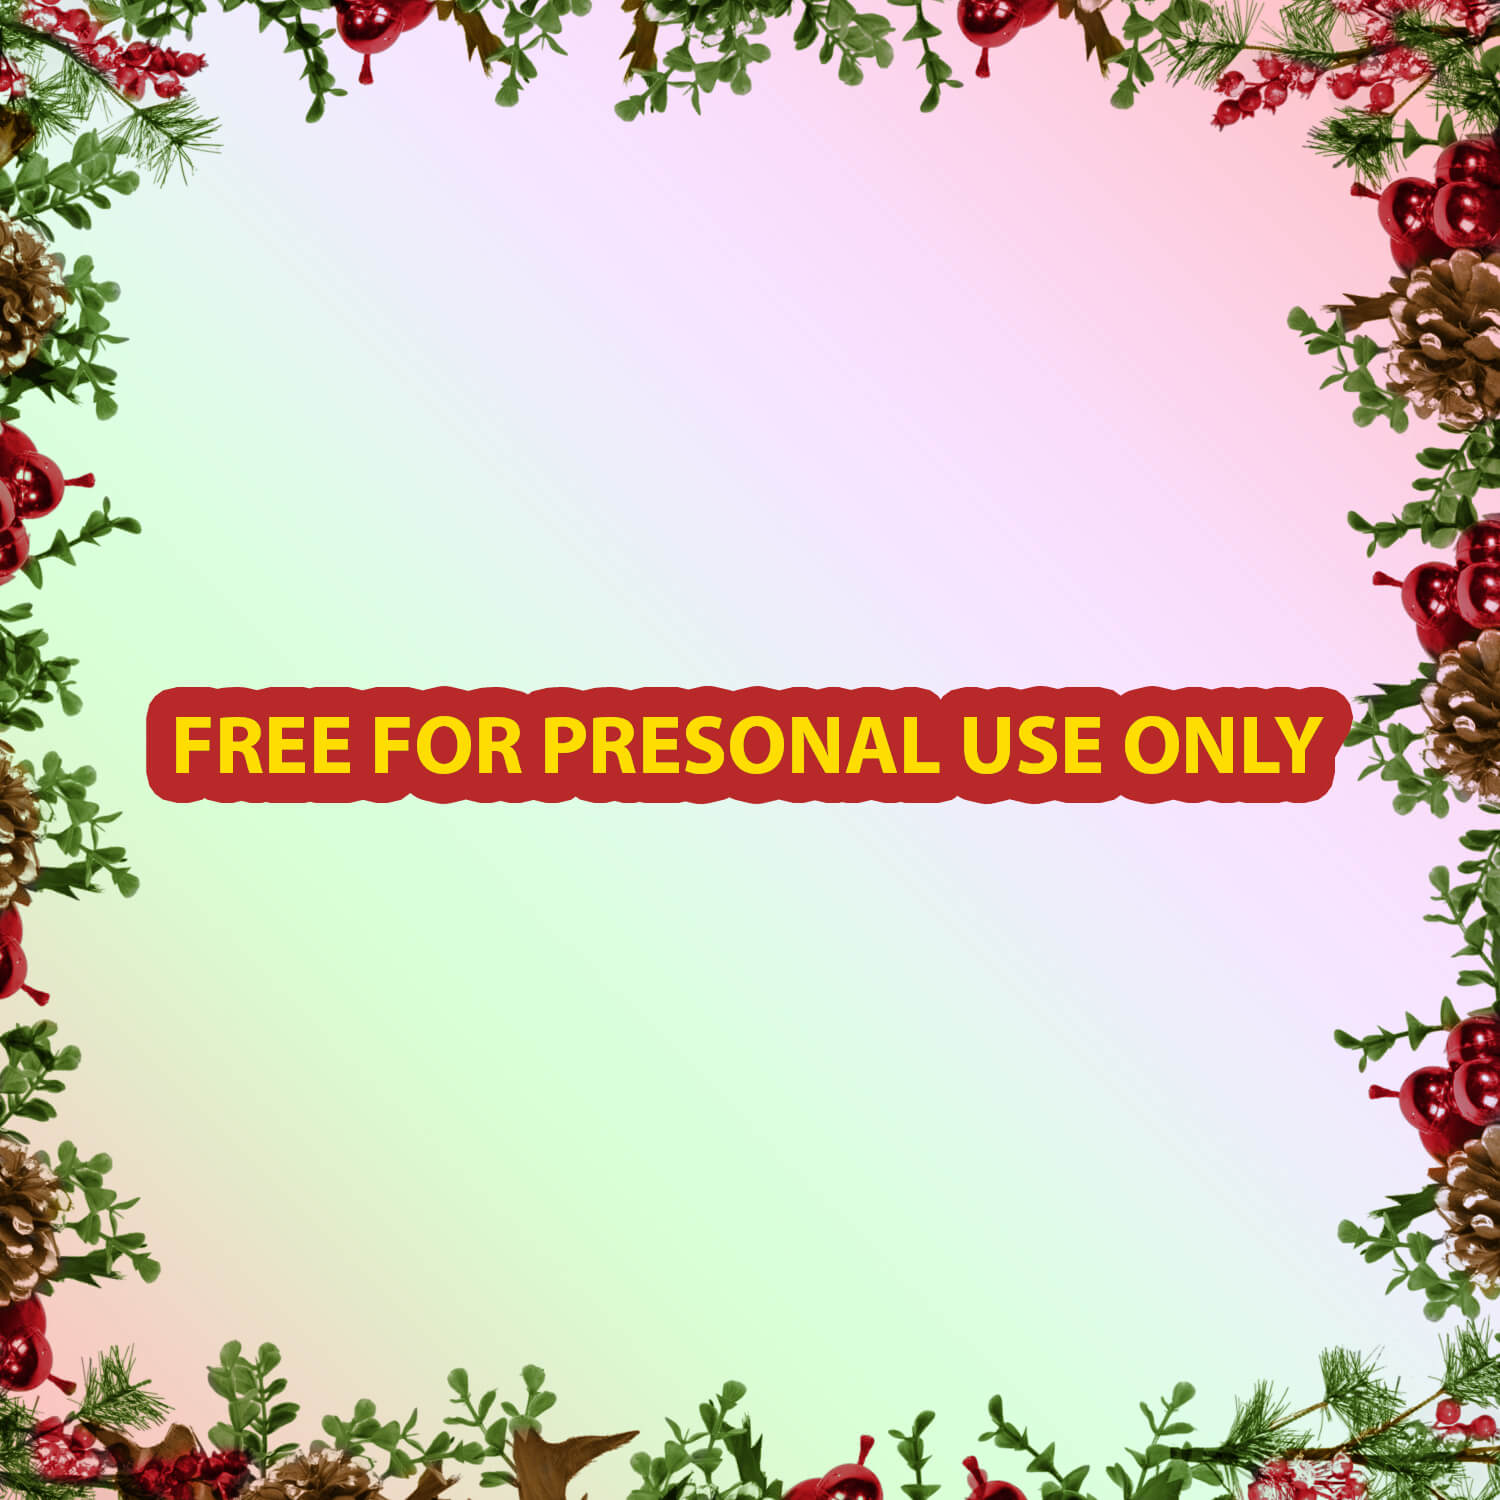 Christmas jingle bell rock free SVG files preview image.